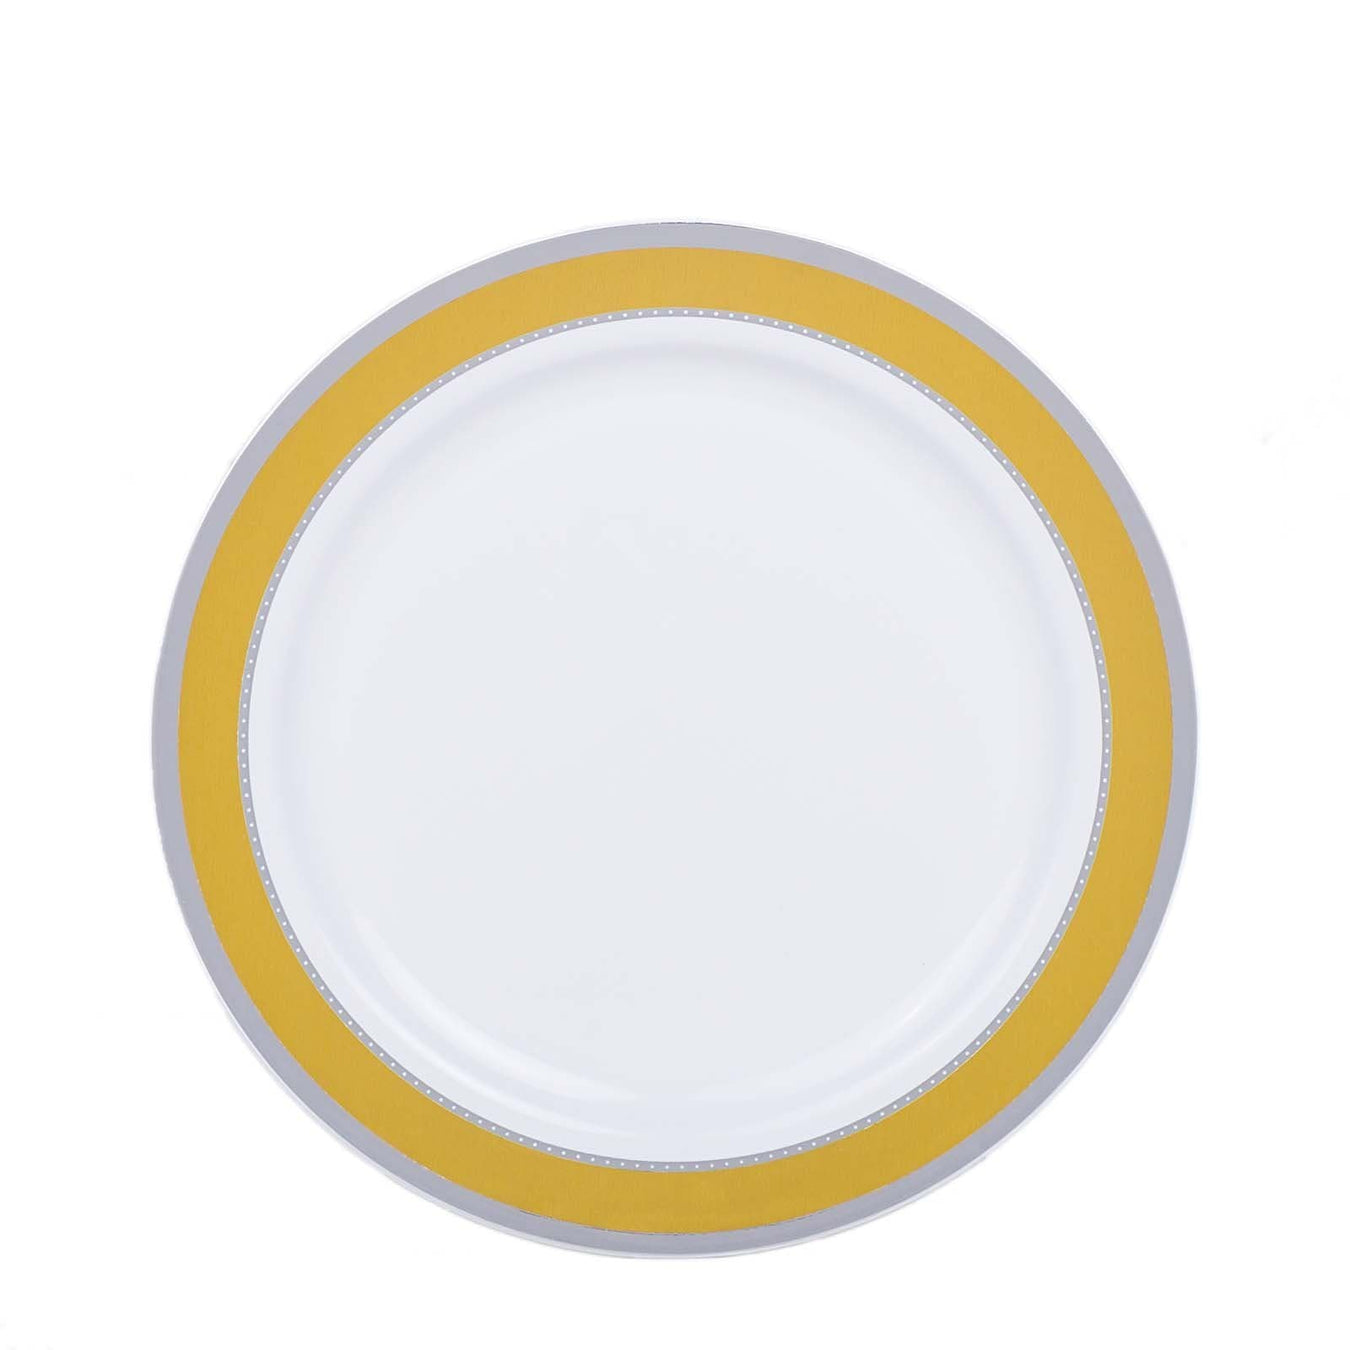 10 pcs 7" wide White Round Salad Plates with Trim - Disposable Tableware